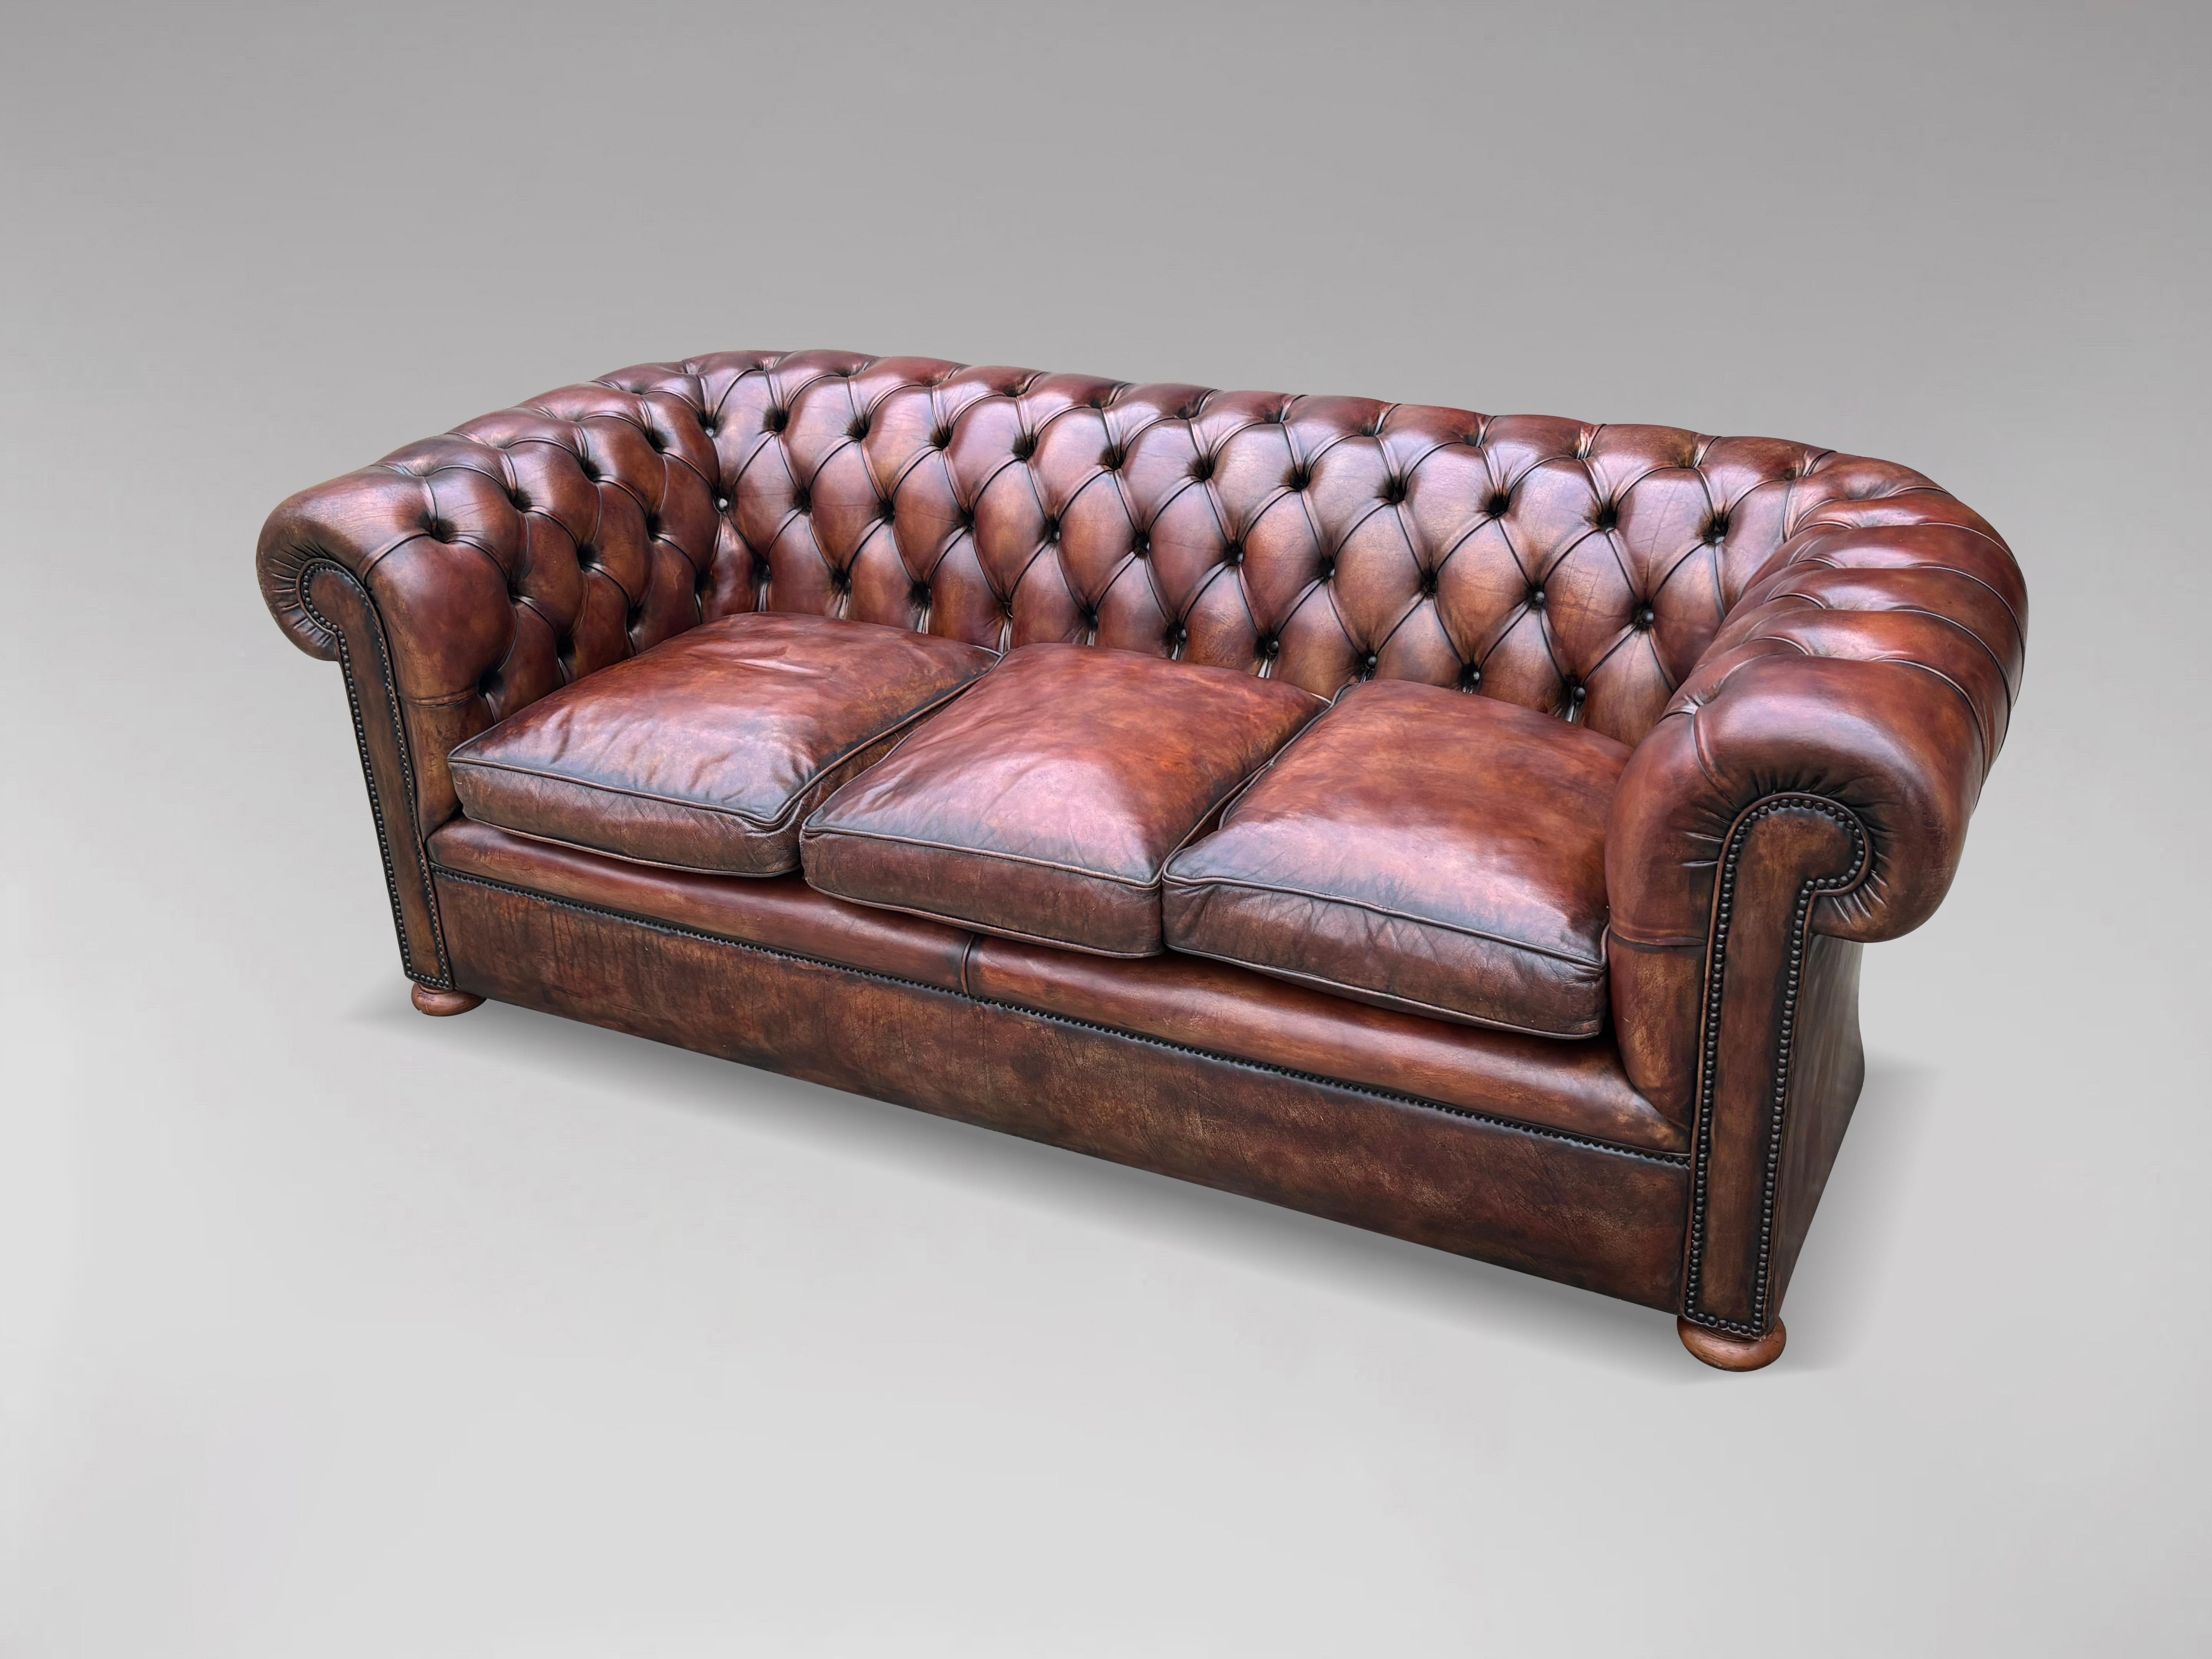 British Stunning Quality 3 Seater Brown Leather Chesterfield Sofa